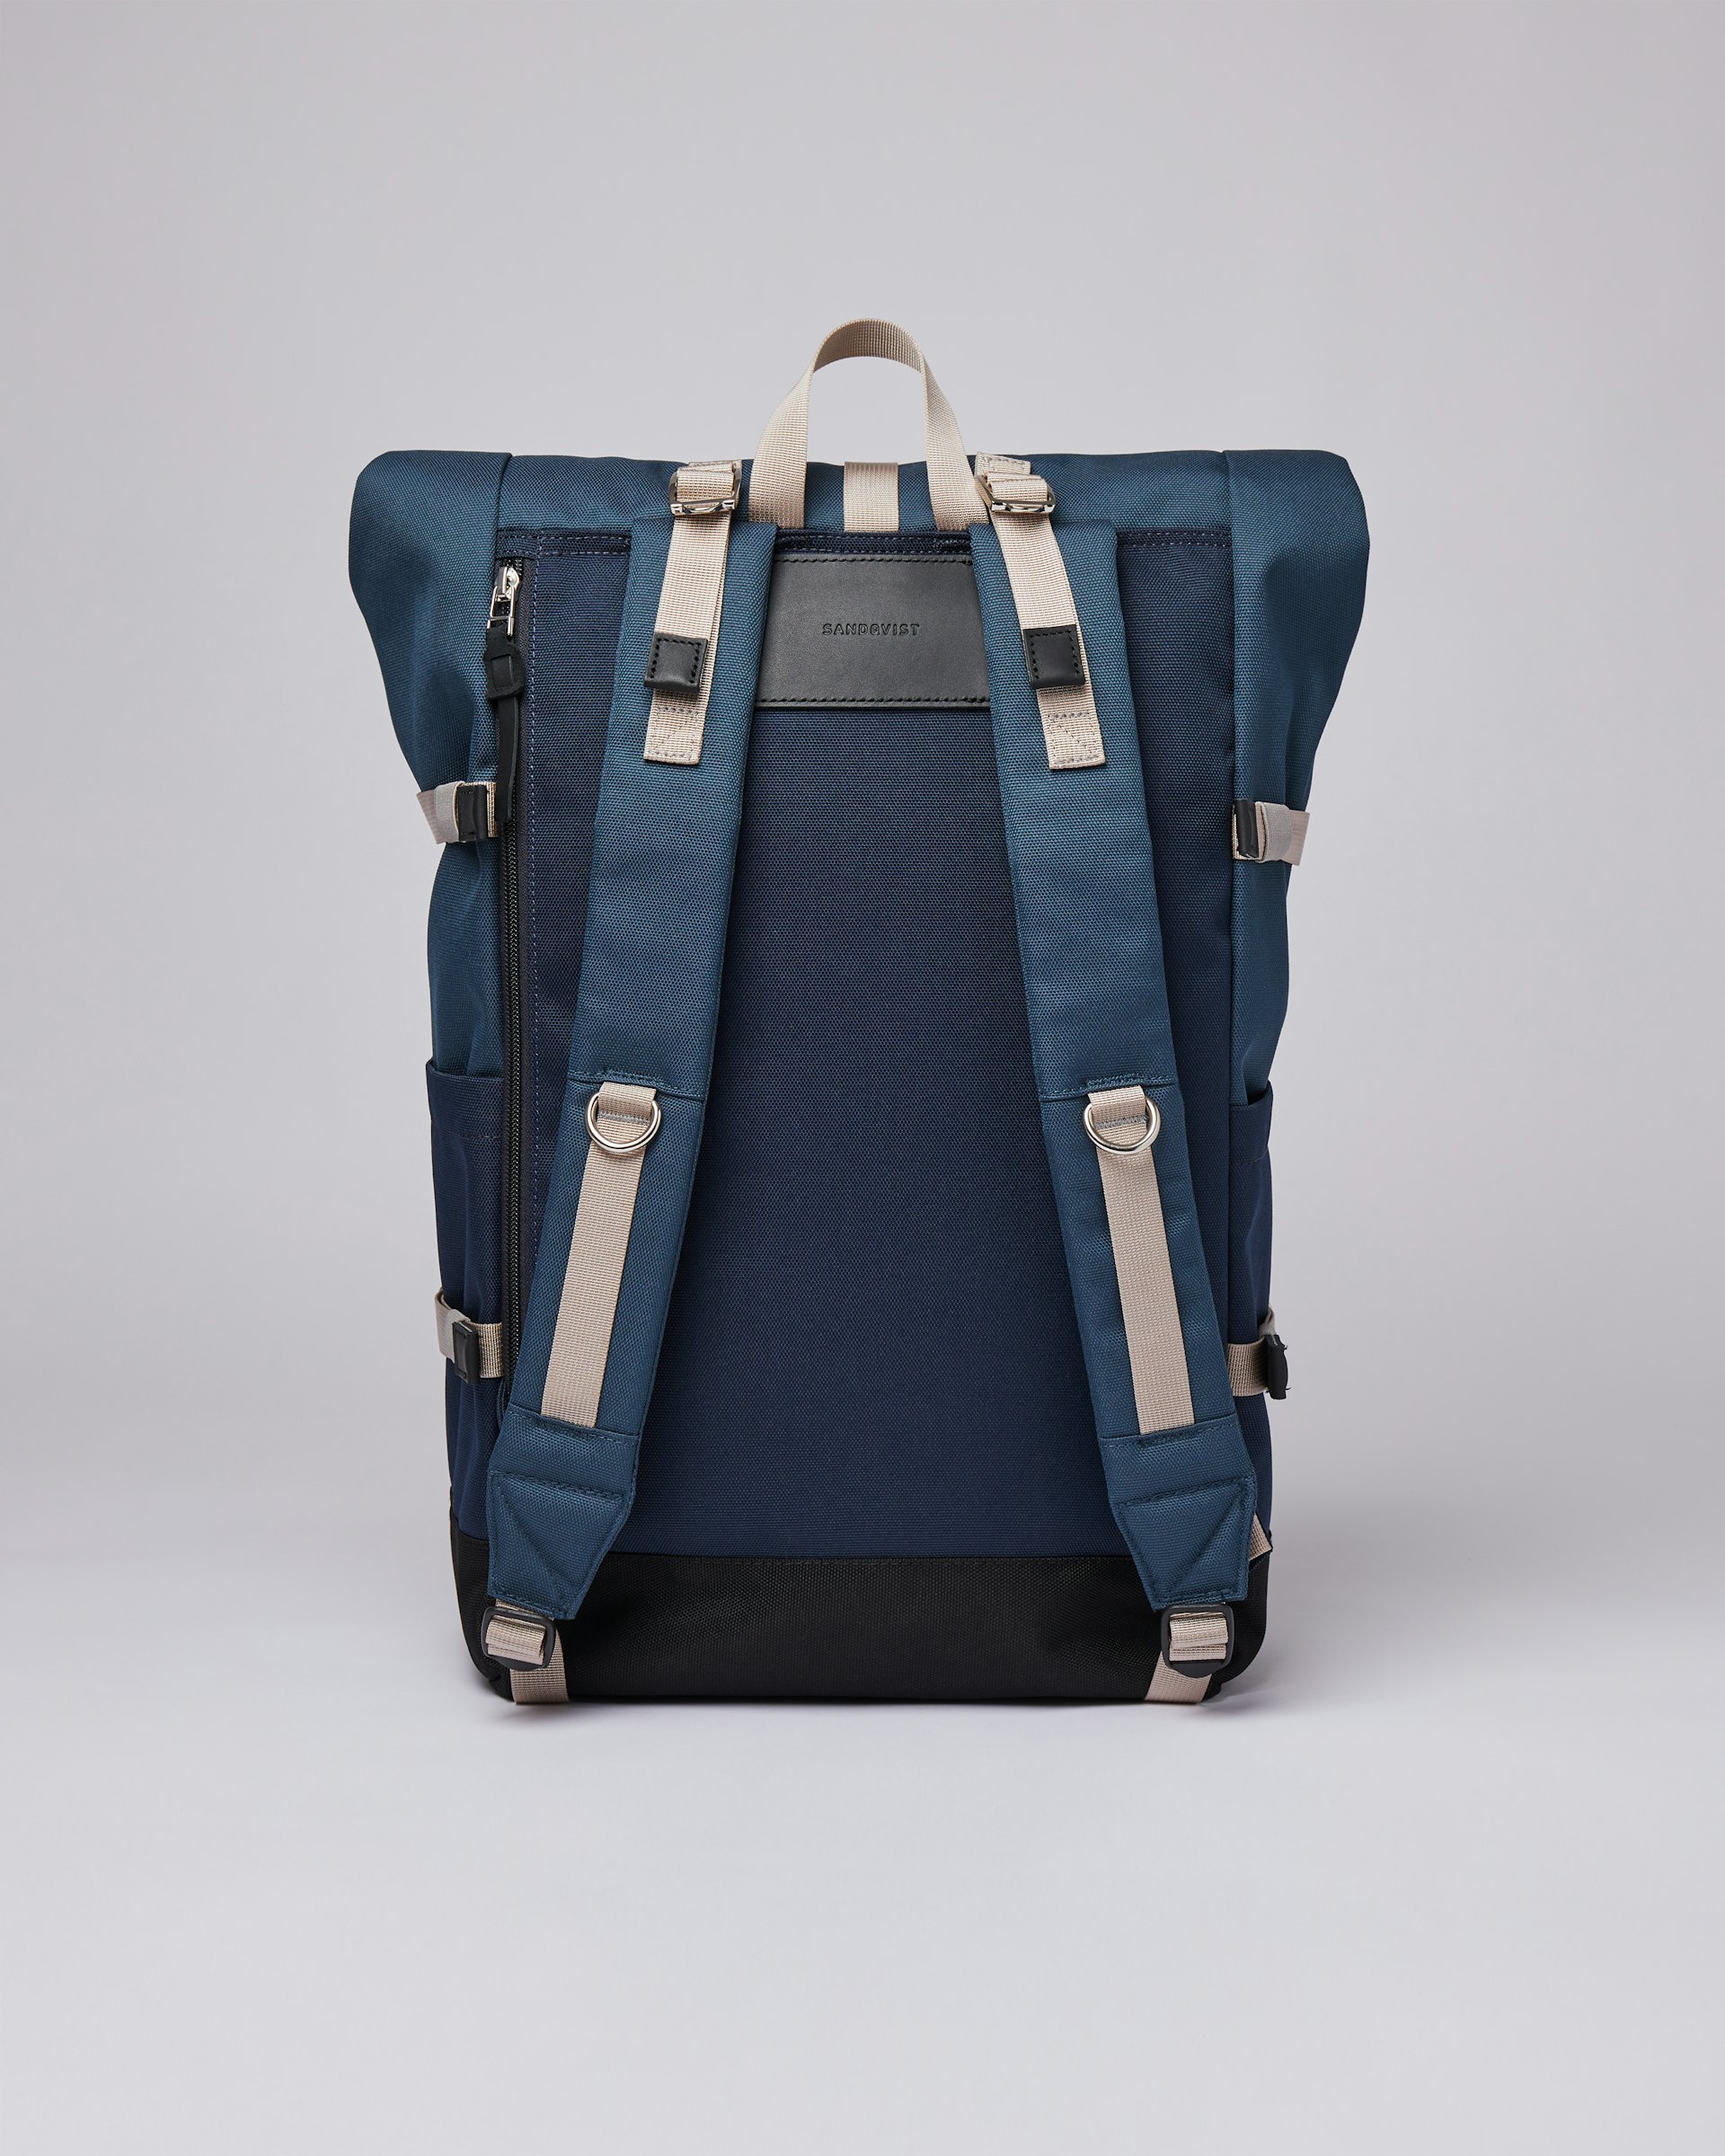 Bernt belongs to the category Backpacks and is in color steel blue & navy (3 of 7)